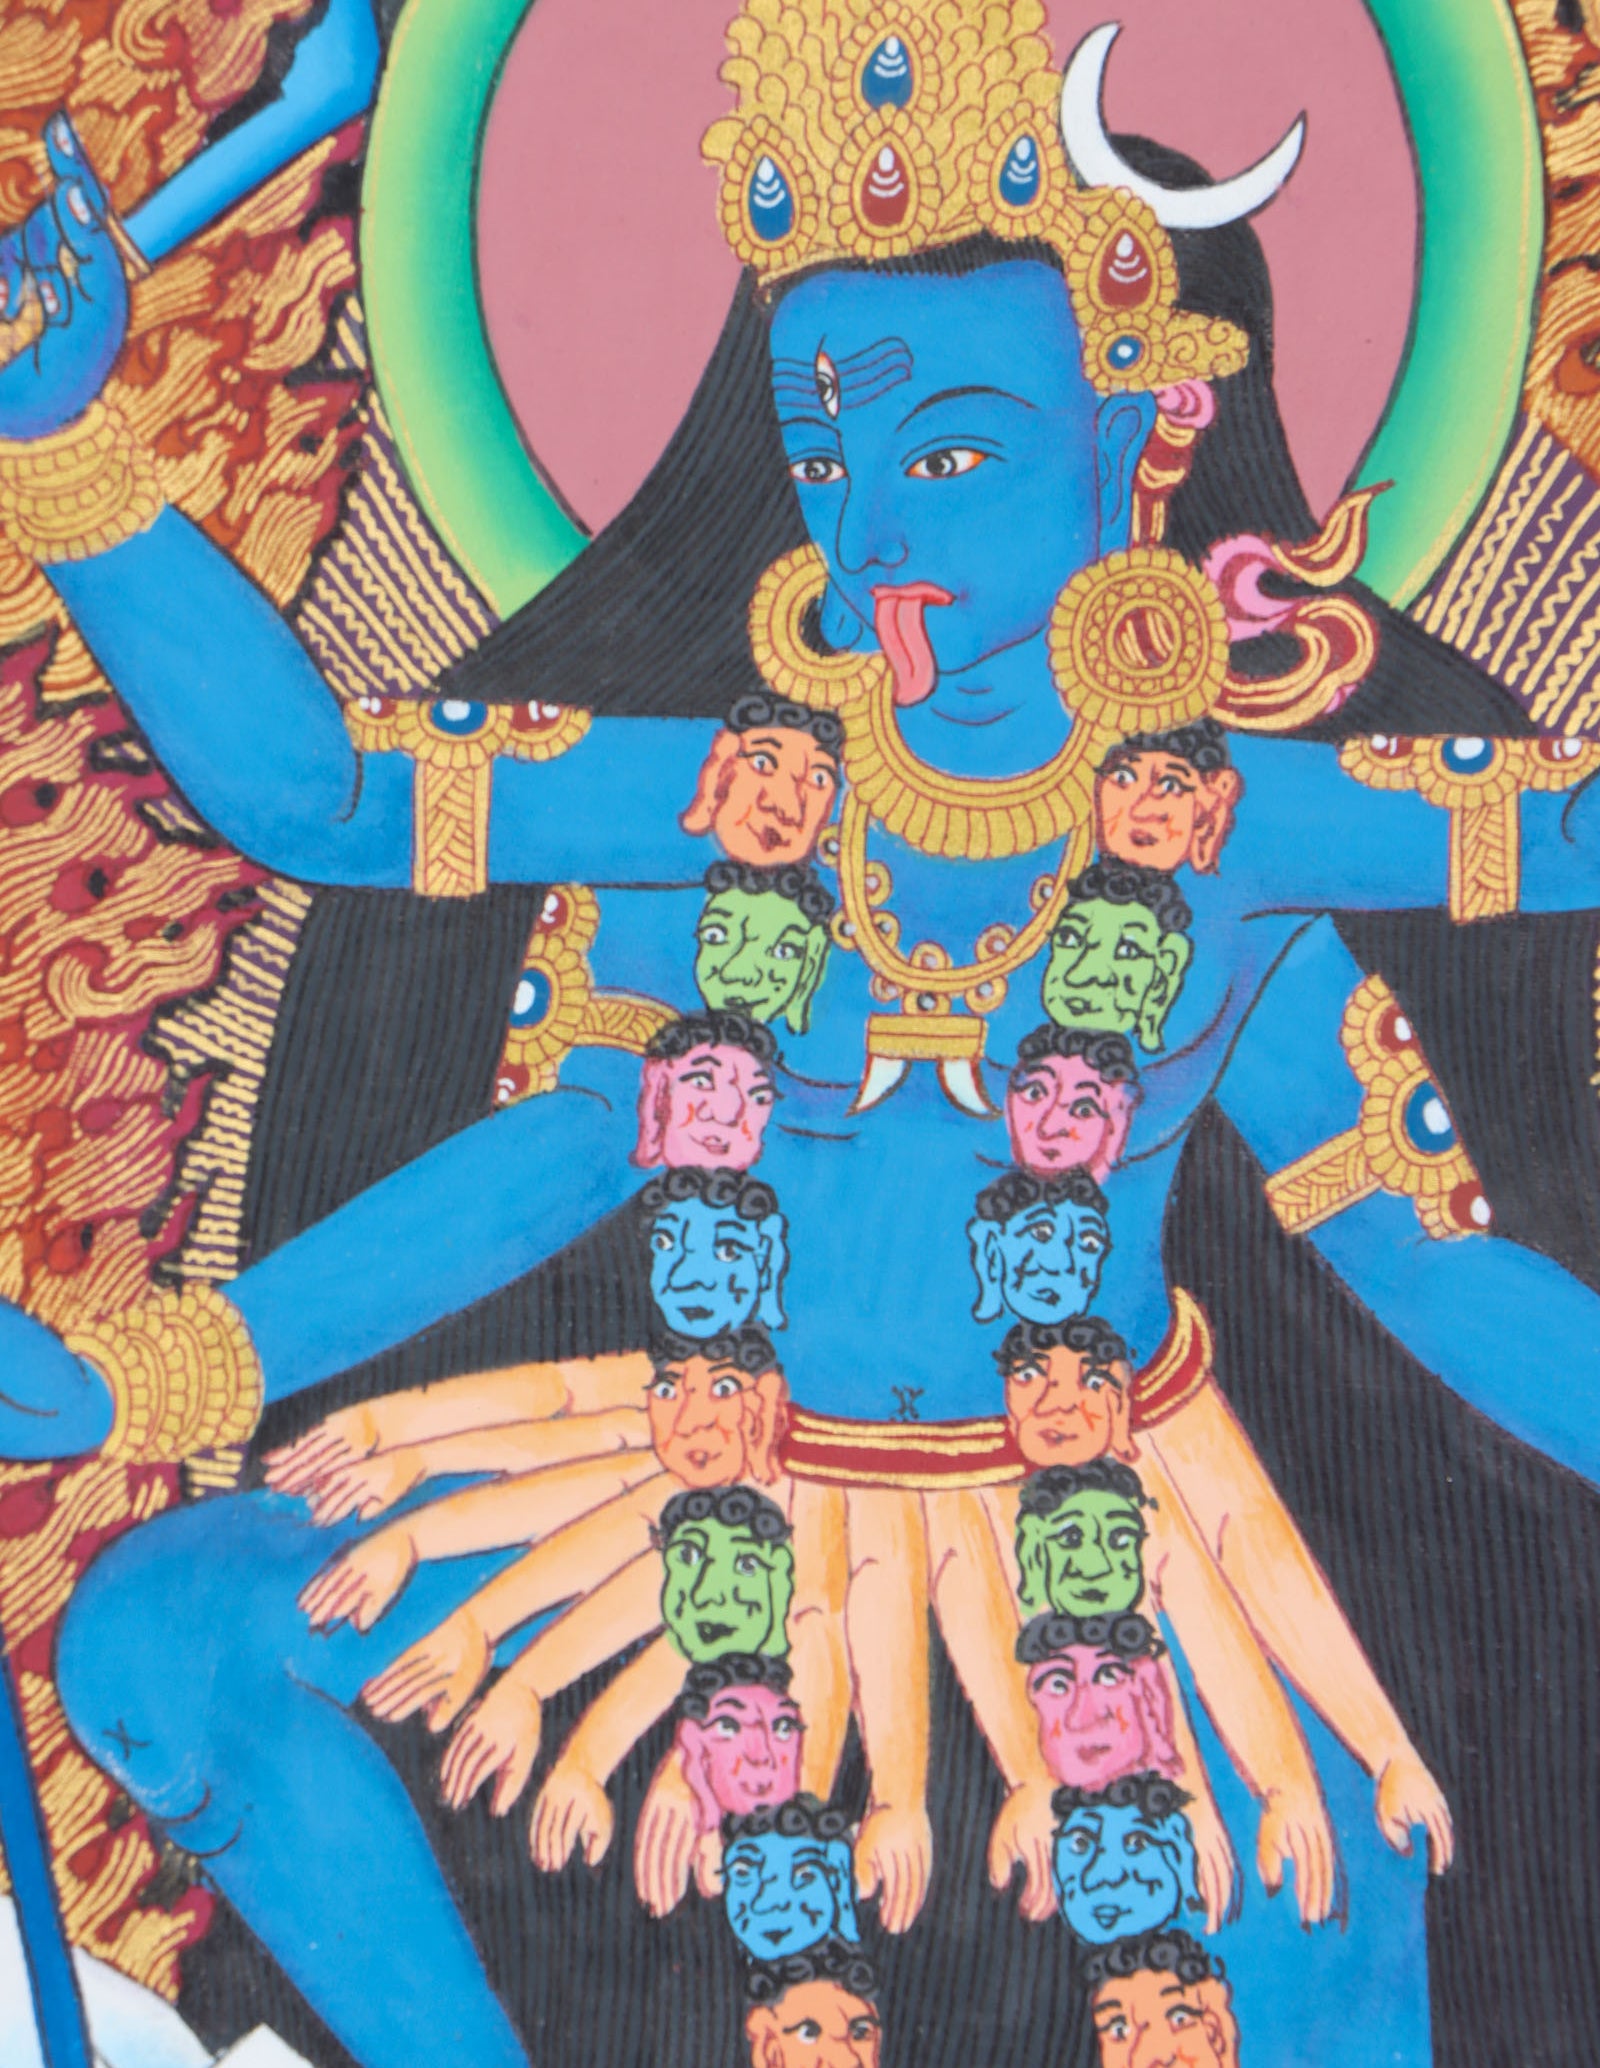 Kali Thangka is a potent symbol of female energy, change and destruction.